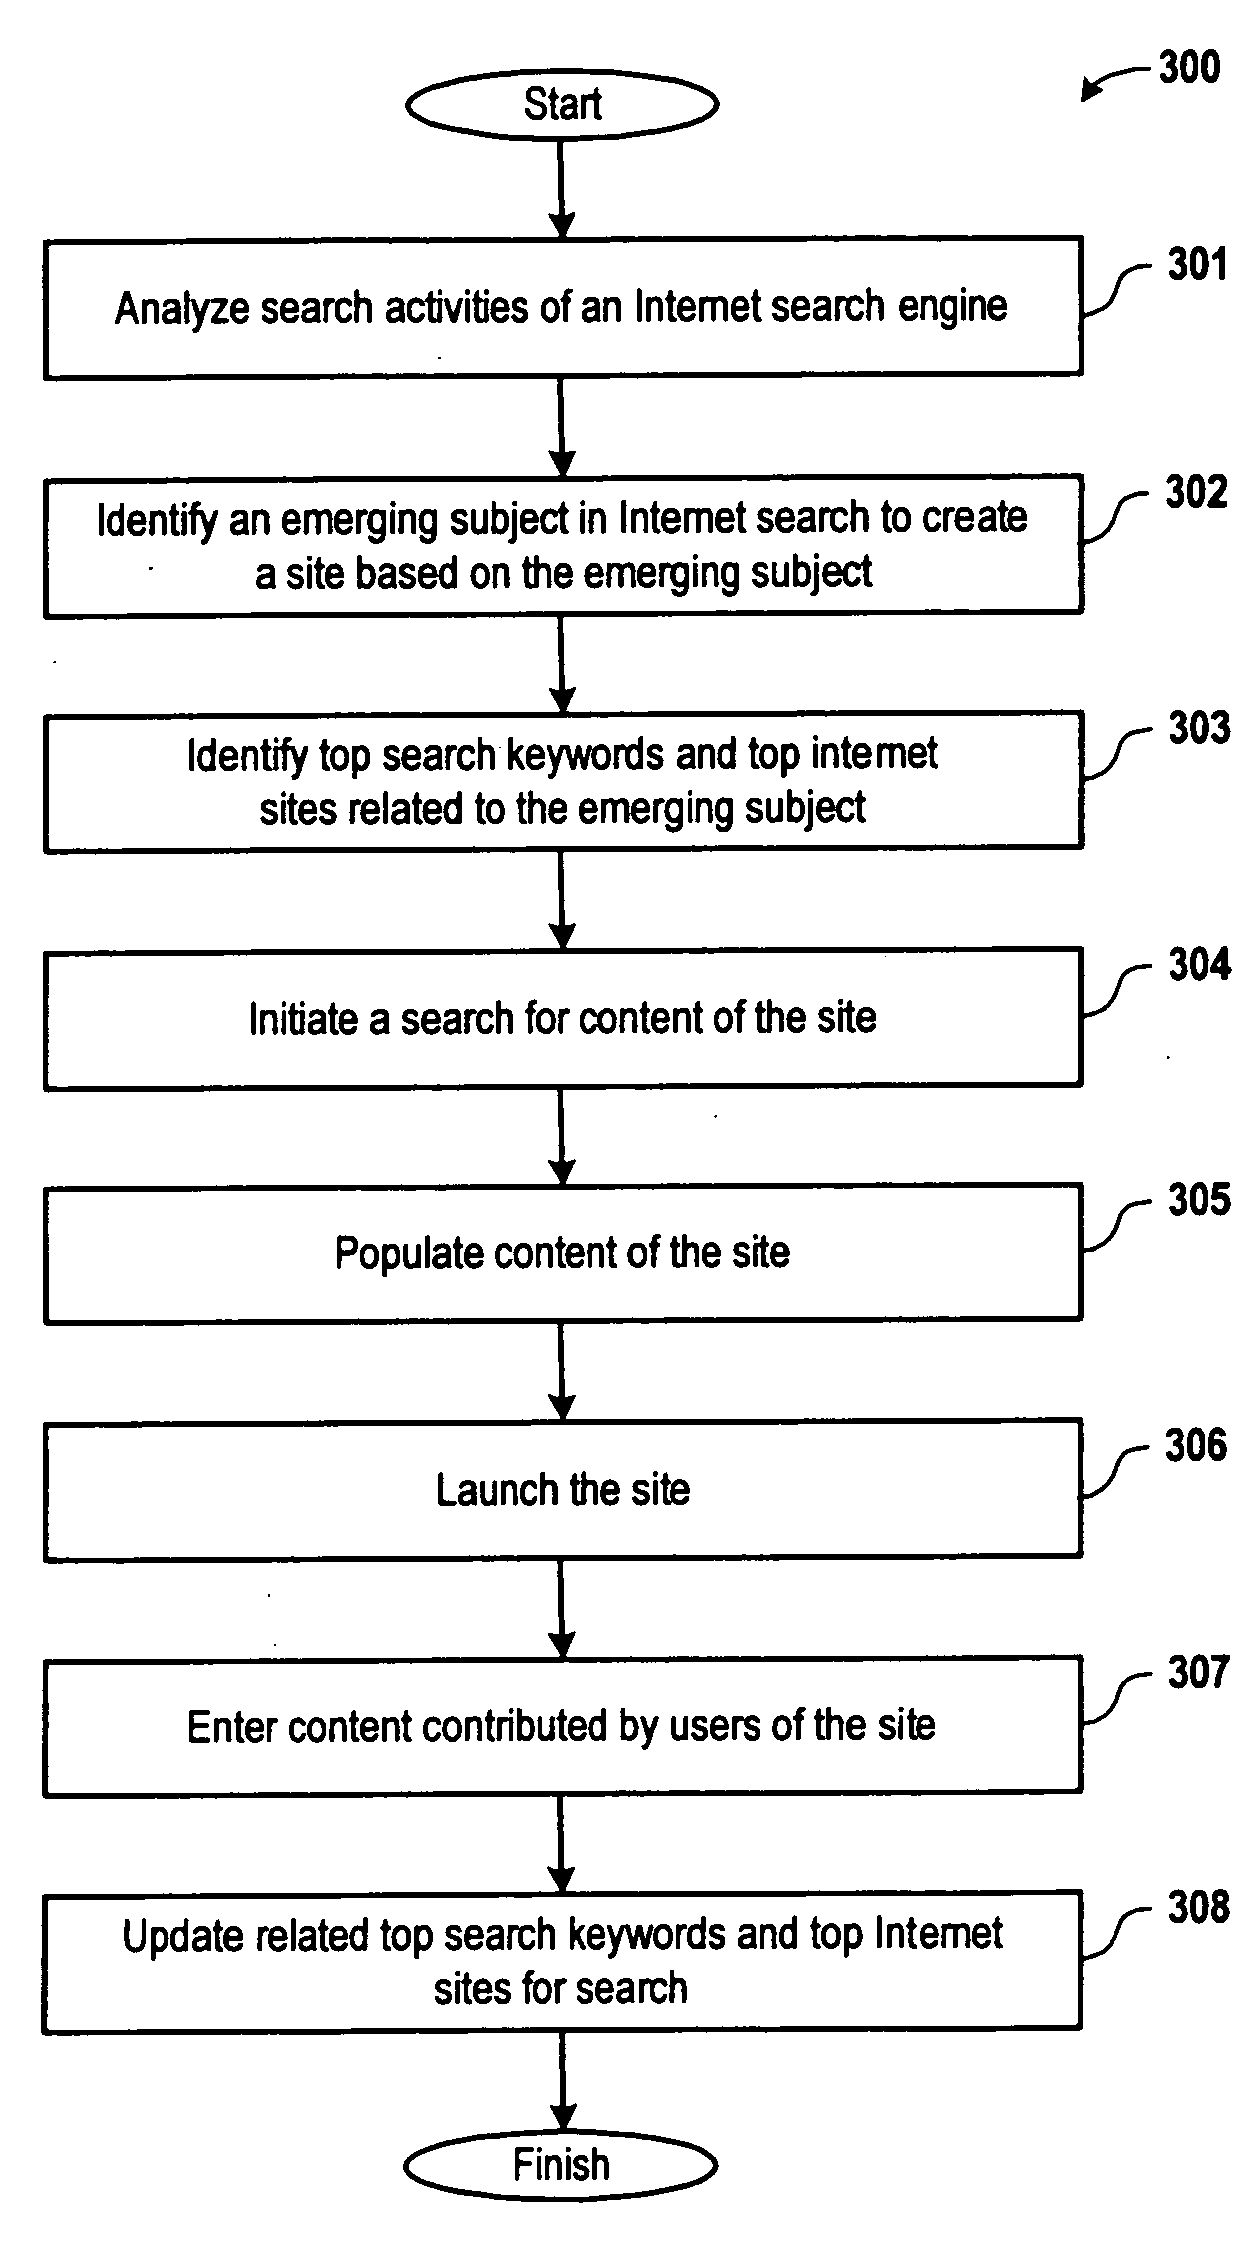 Automated system and method for creating a content-rich site based on an emerging subject of internet search